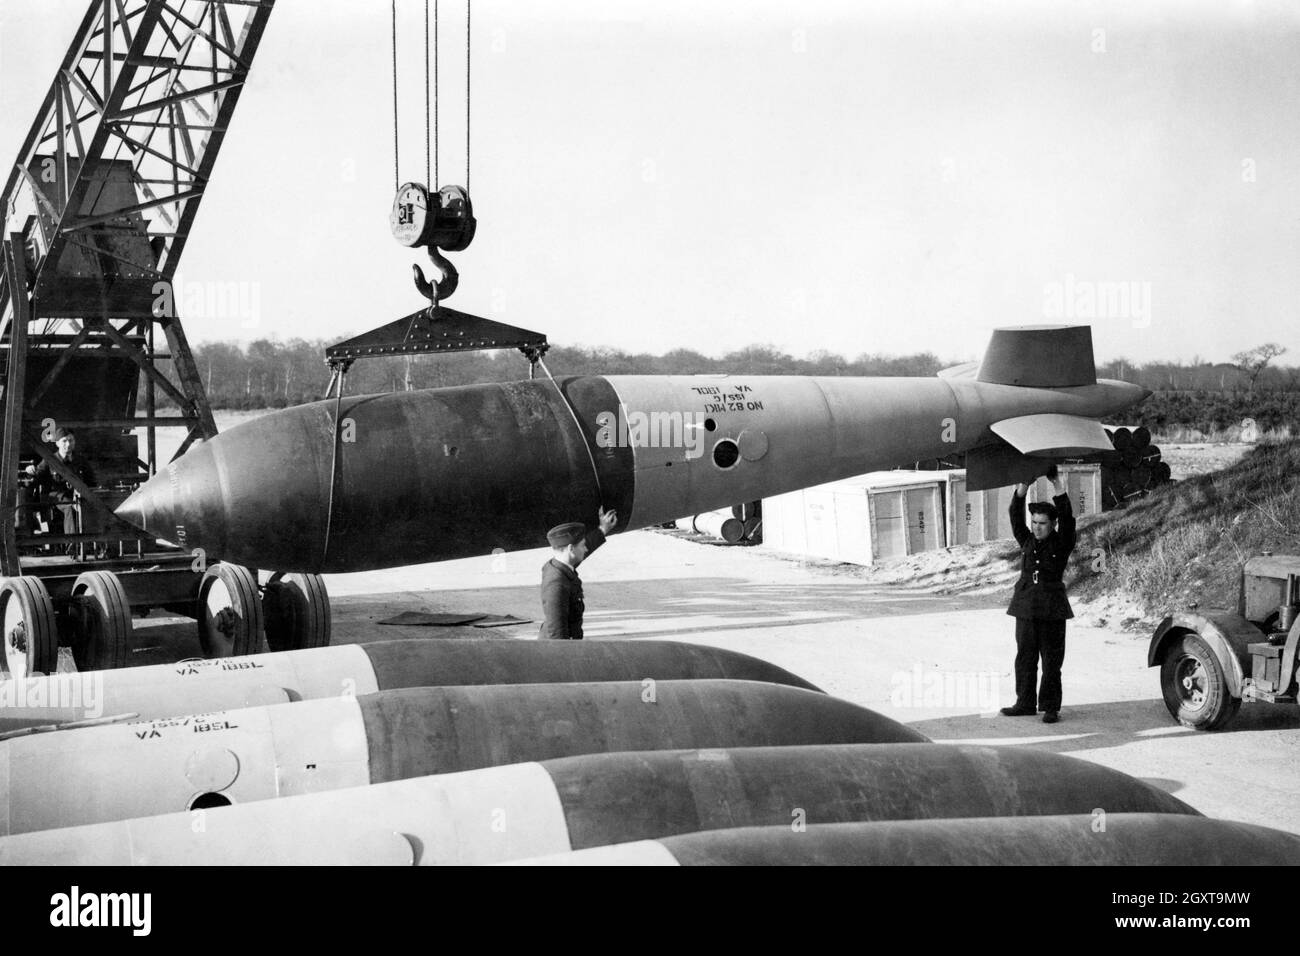 The ten ton grand slam bomb. This was a very high charge bomb that was used against difficult precision targets such as submarine pens and bridges. It was designed by Barnes Wallis. Stock Photo